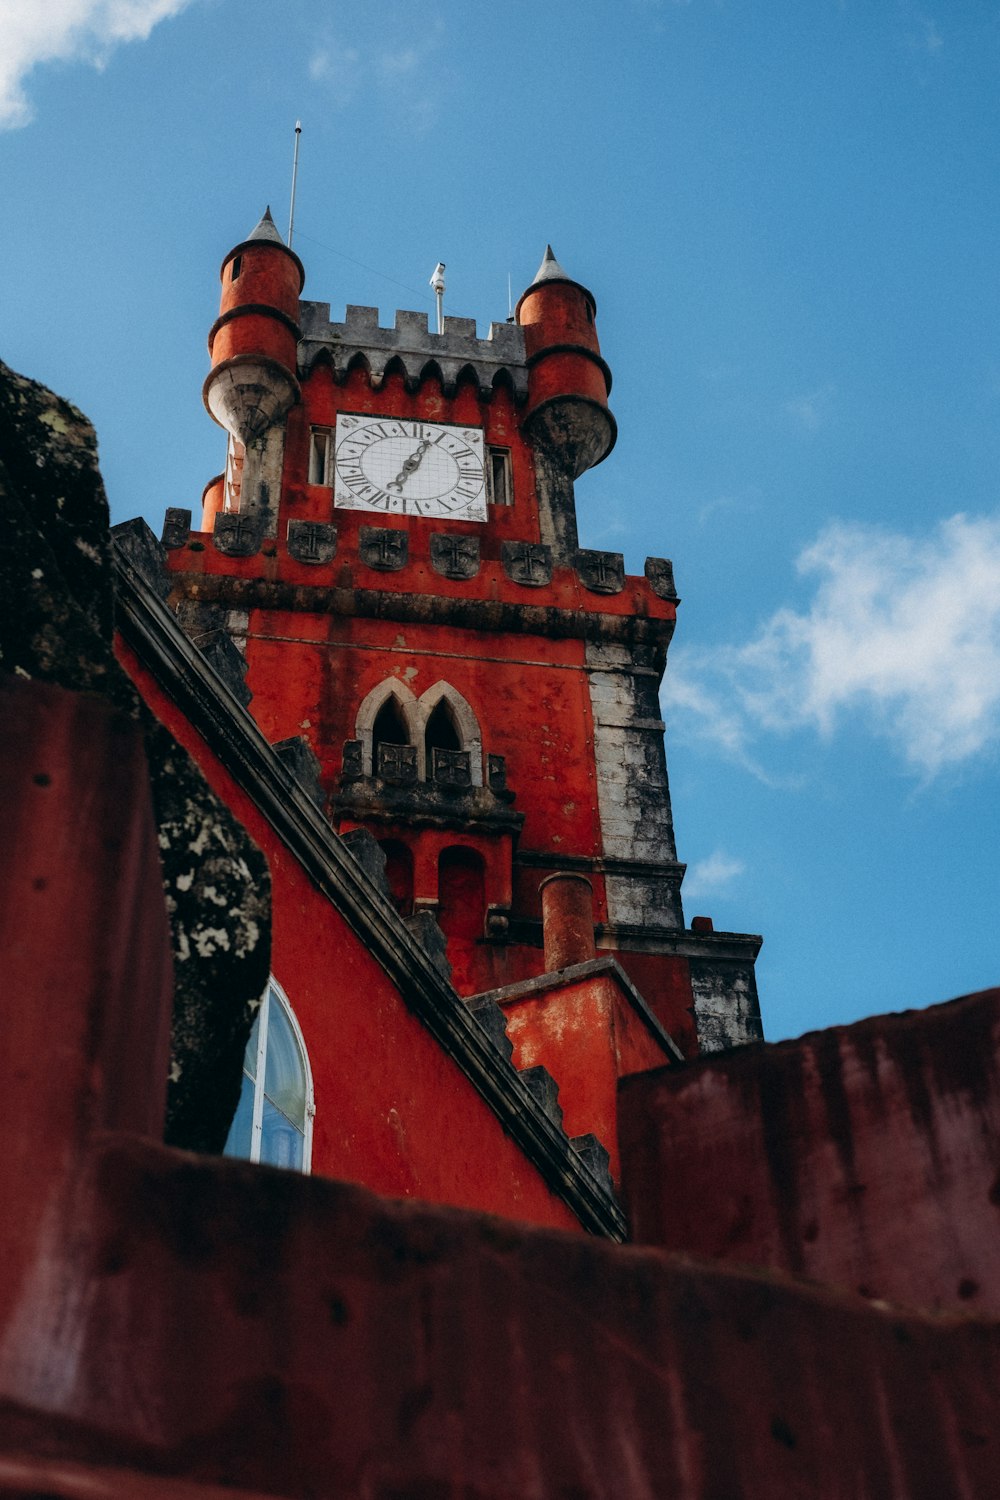 a red tower with a clock on the top of it